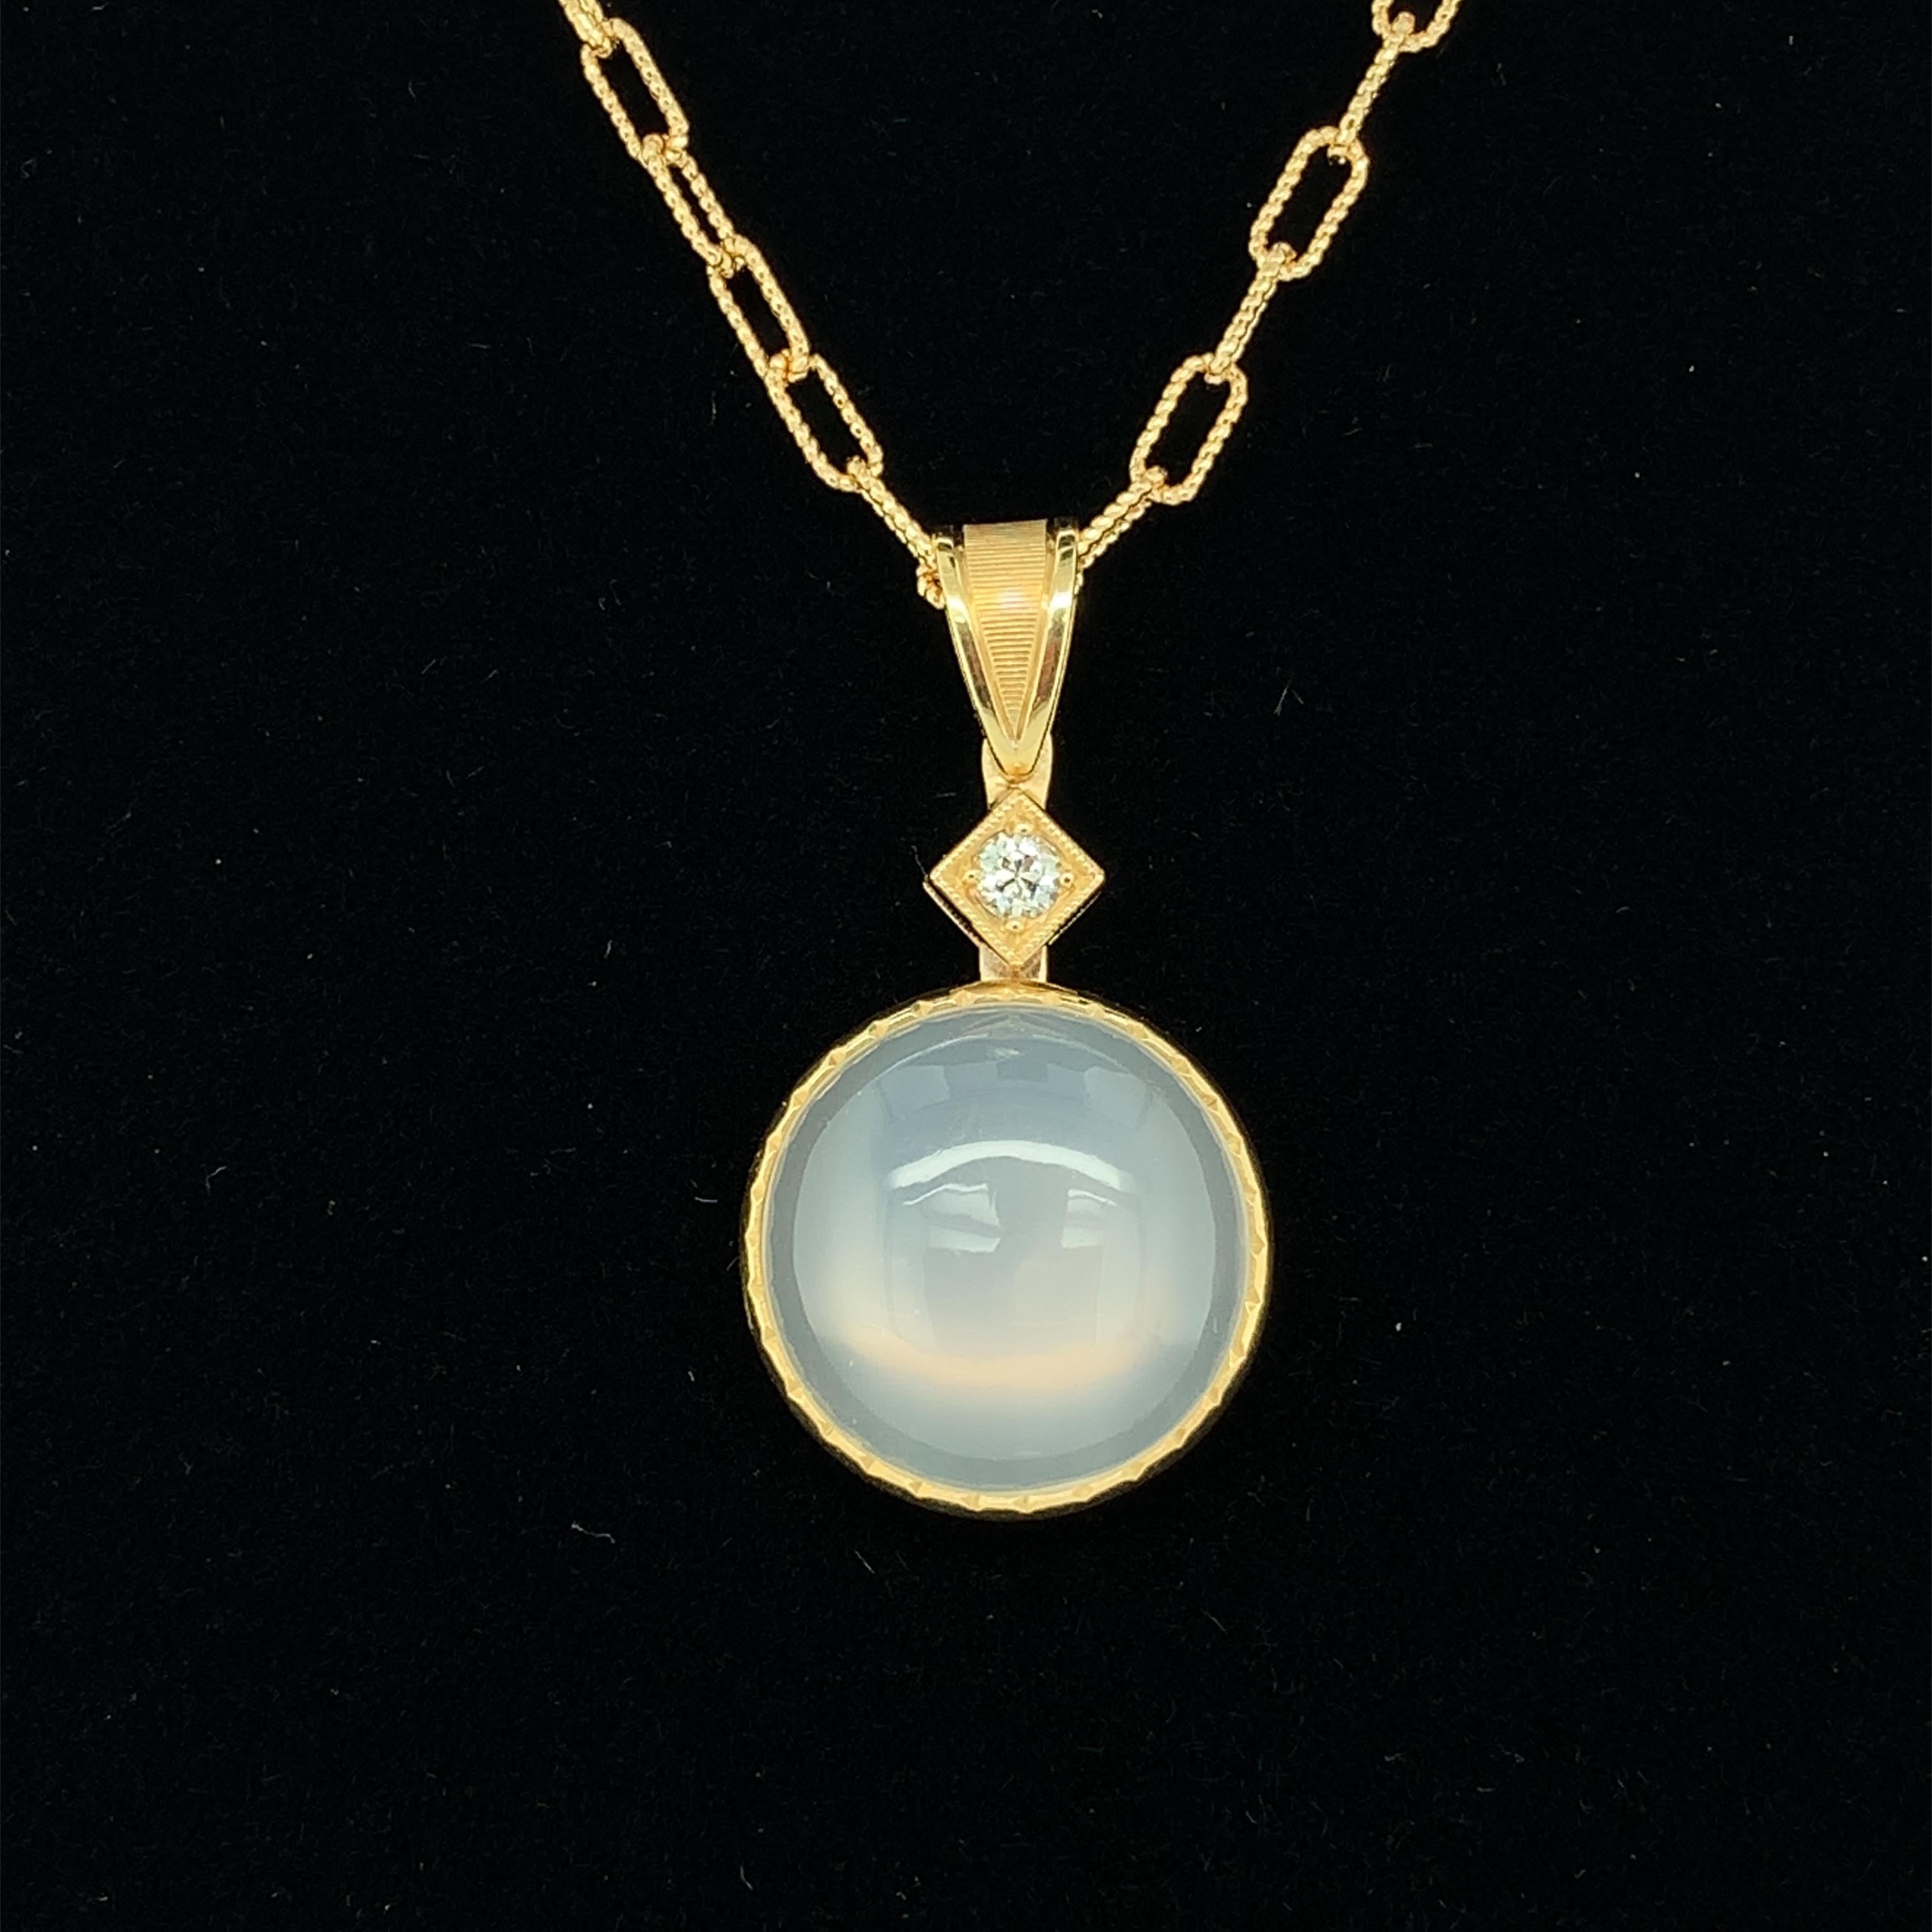 Women's 16.95 ct. Round Moonstone, Diamond, Yellow Gold Pendant Necklace with Chain